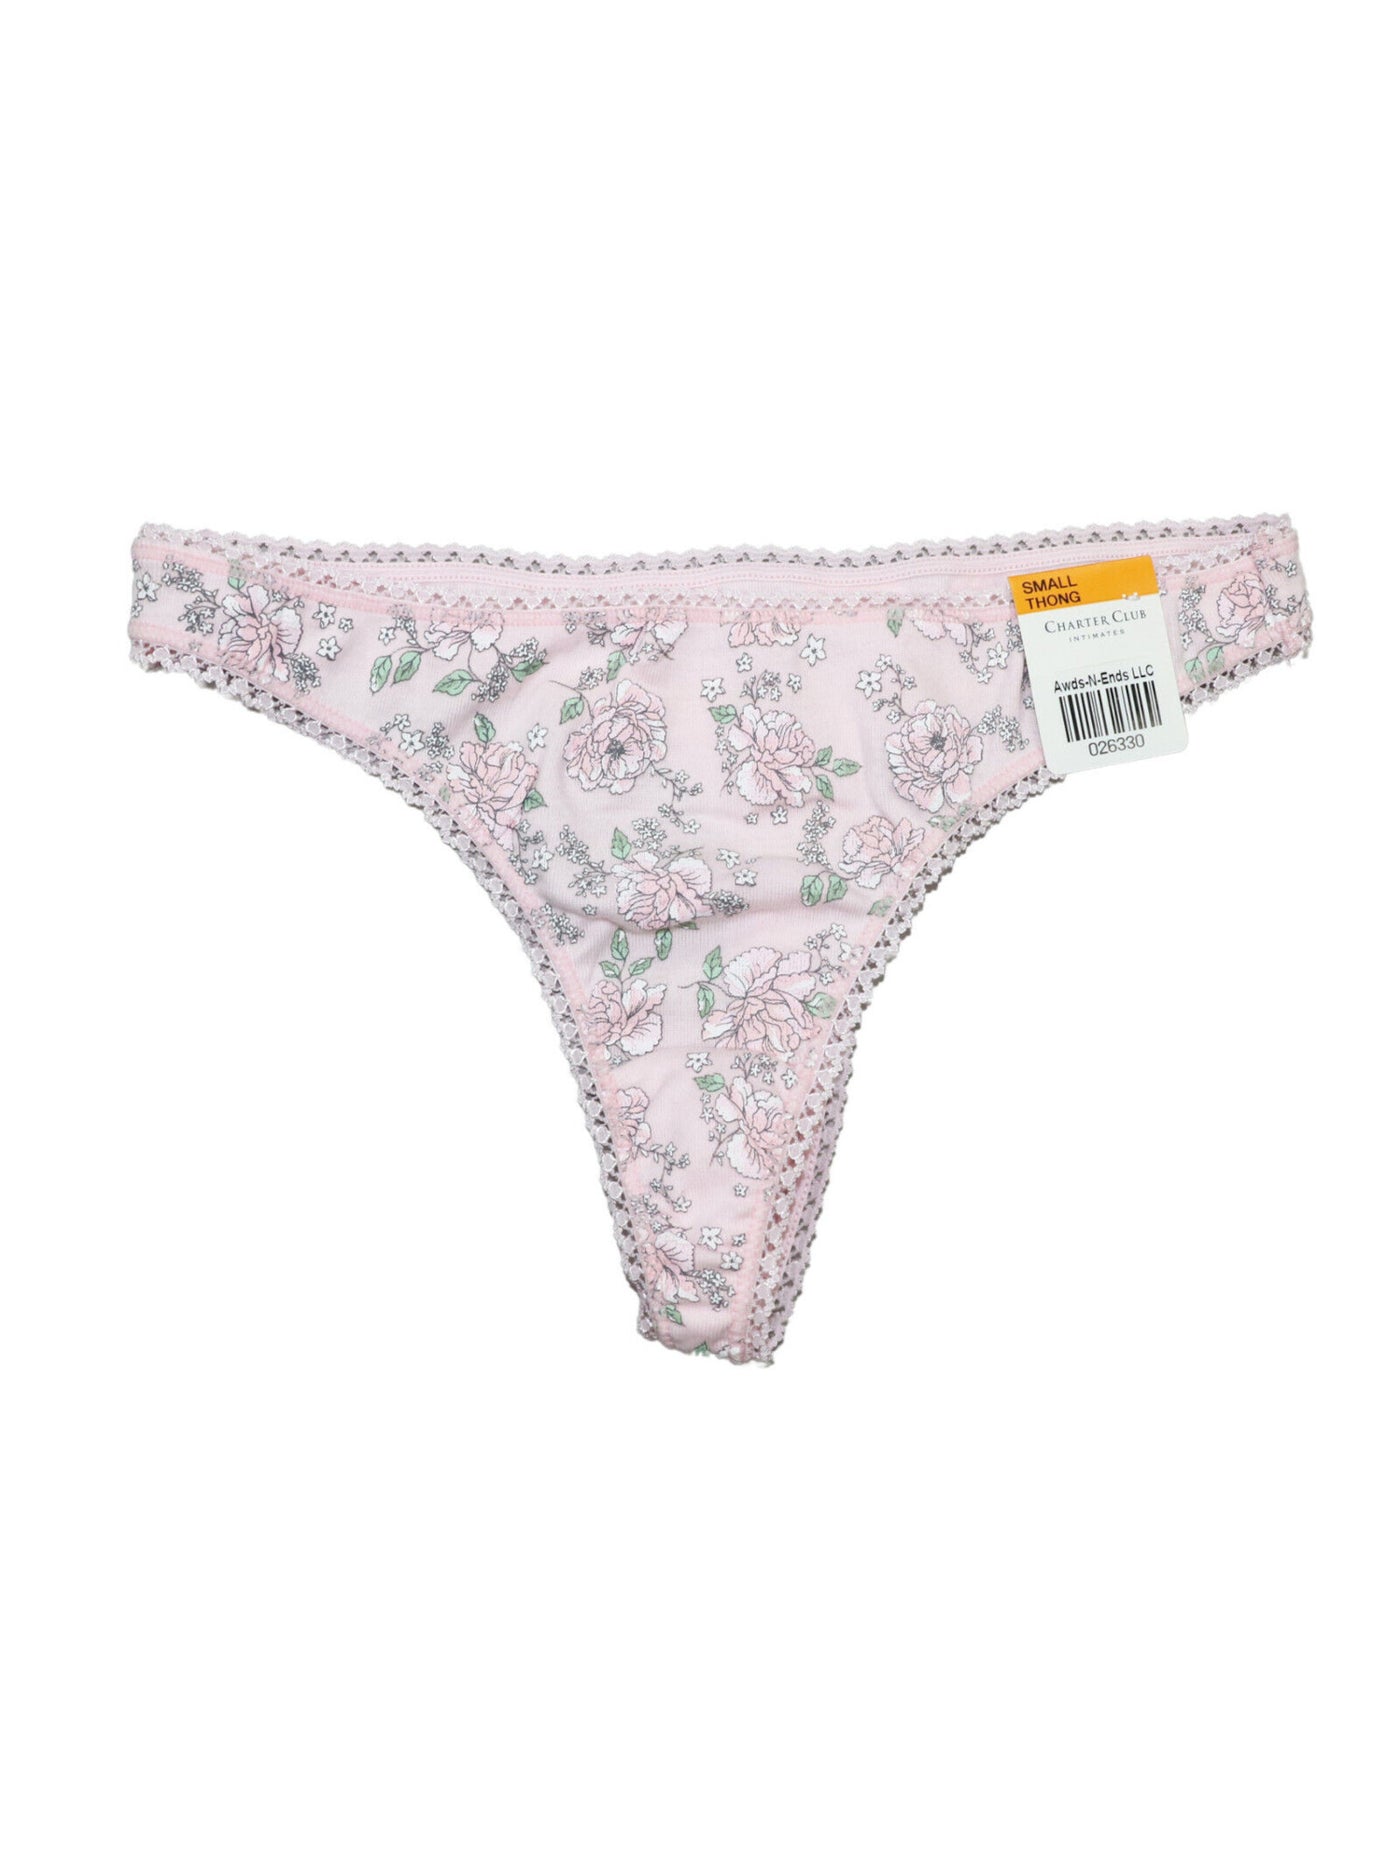 CHARTER CLUB Intimates Pink Floral Thong Underwear S